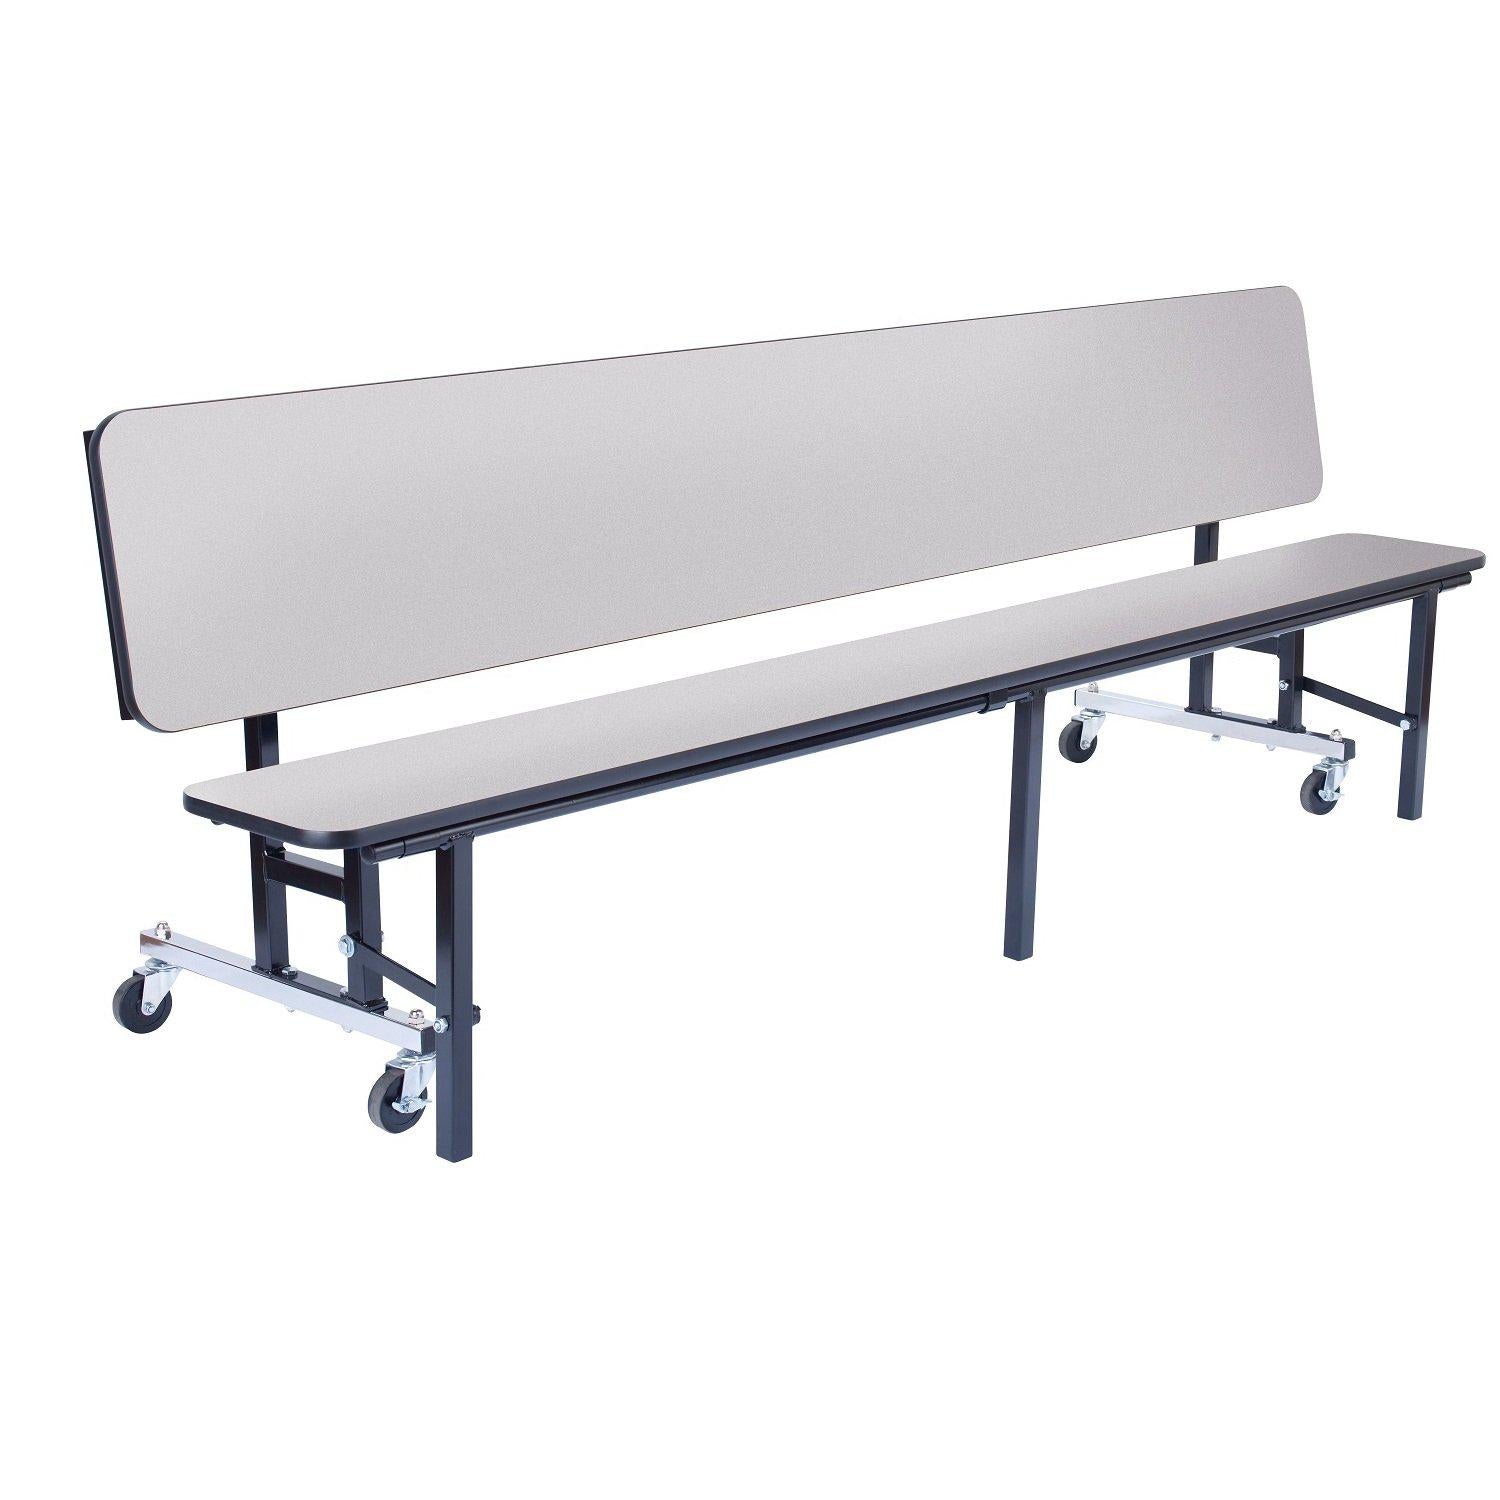 Mobile Convertible Bench Cafeteria Table, 6'L, Particleboard Core, Vinyl T-Mold Edge, Textured Black Frame